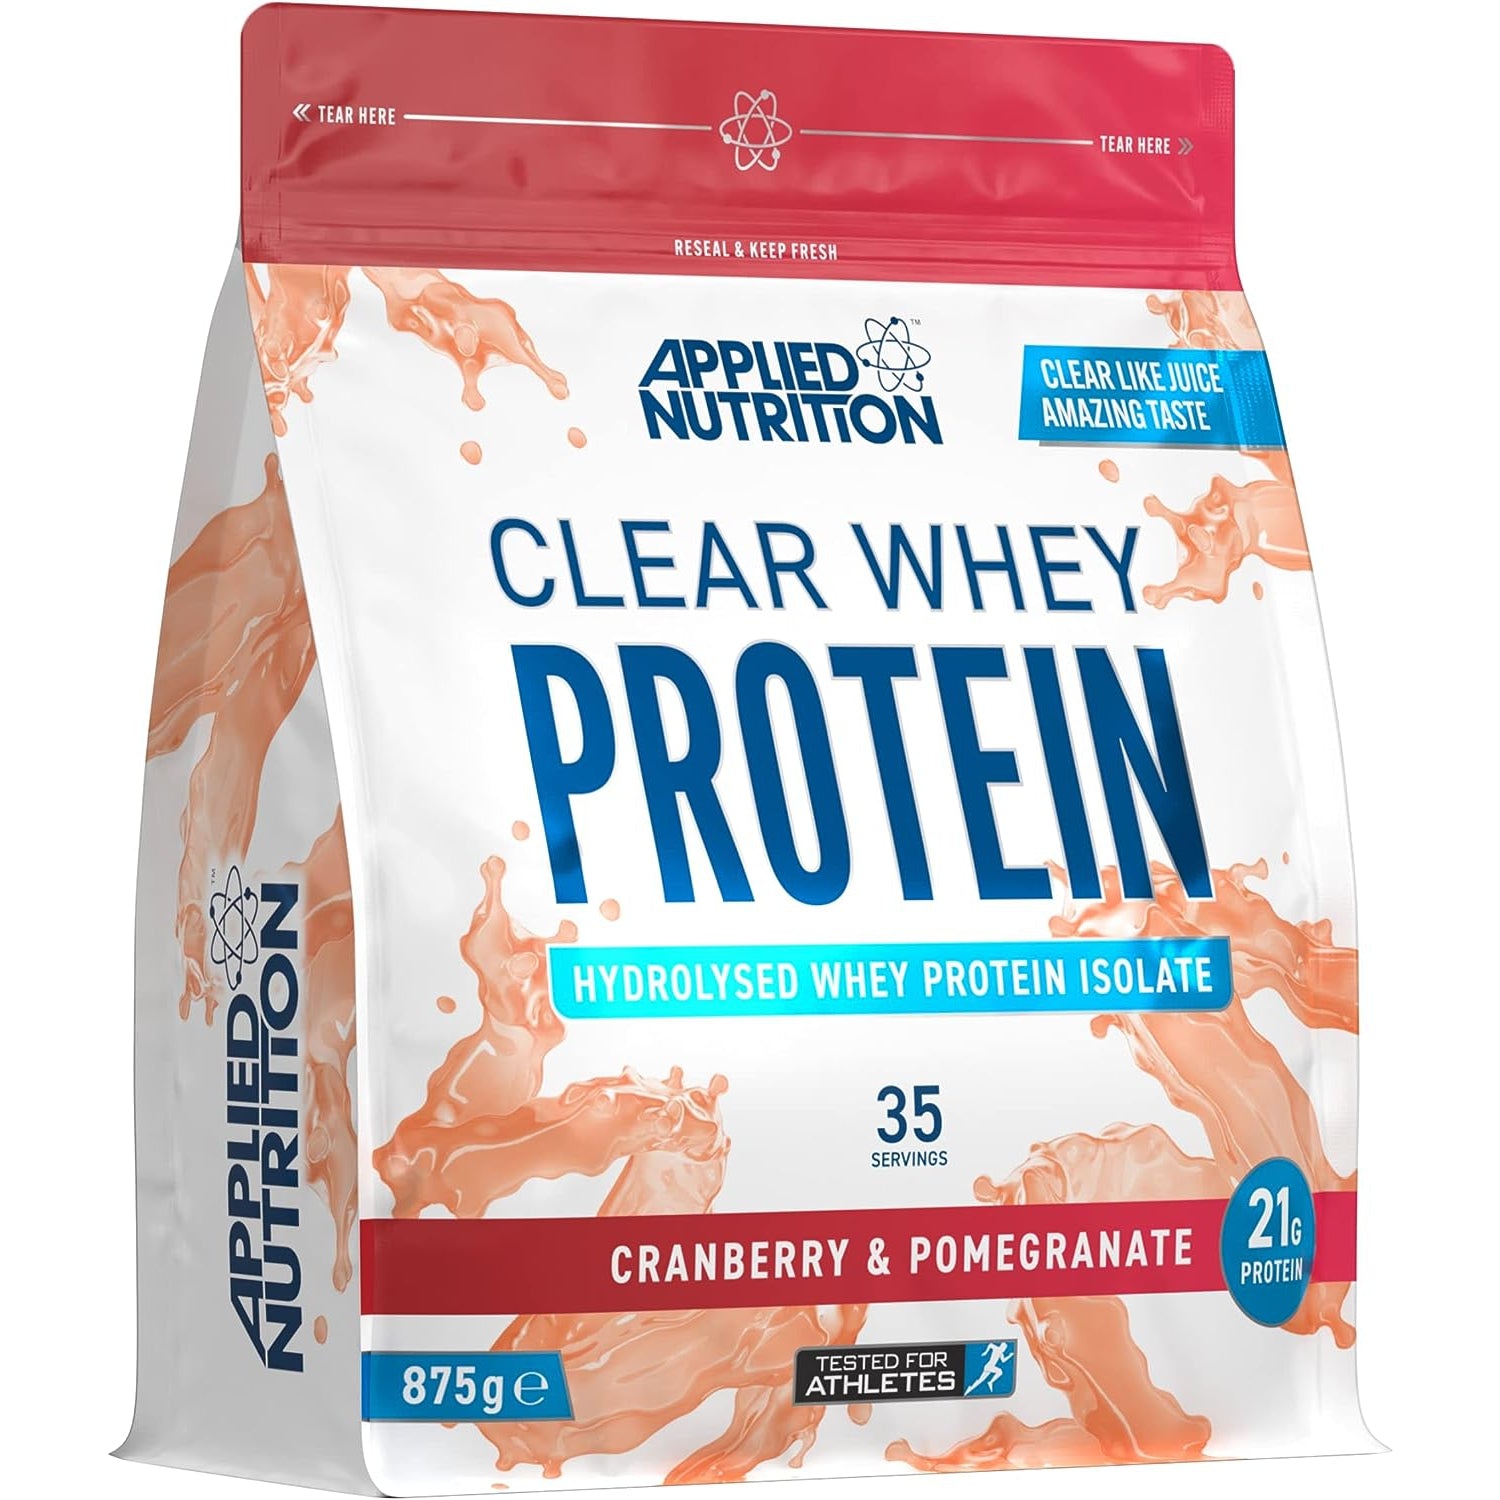 Applied Nutrition Clear Whey Protein Hydrolysed Whey Protein Isolate 875g 35 Servings Cranberry & Pomegranate